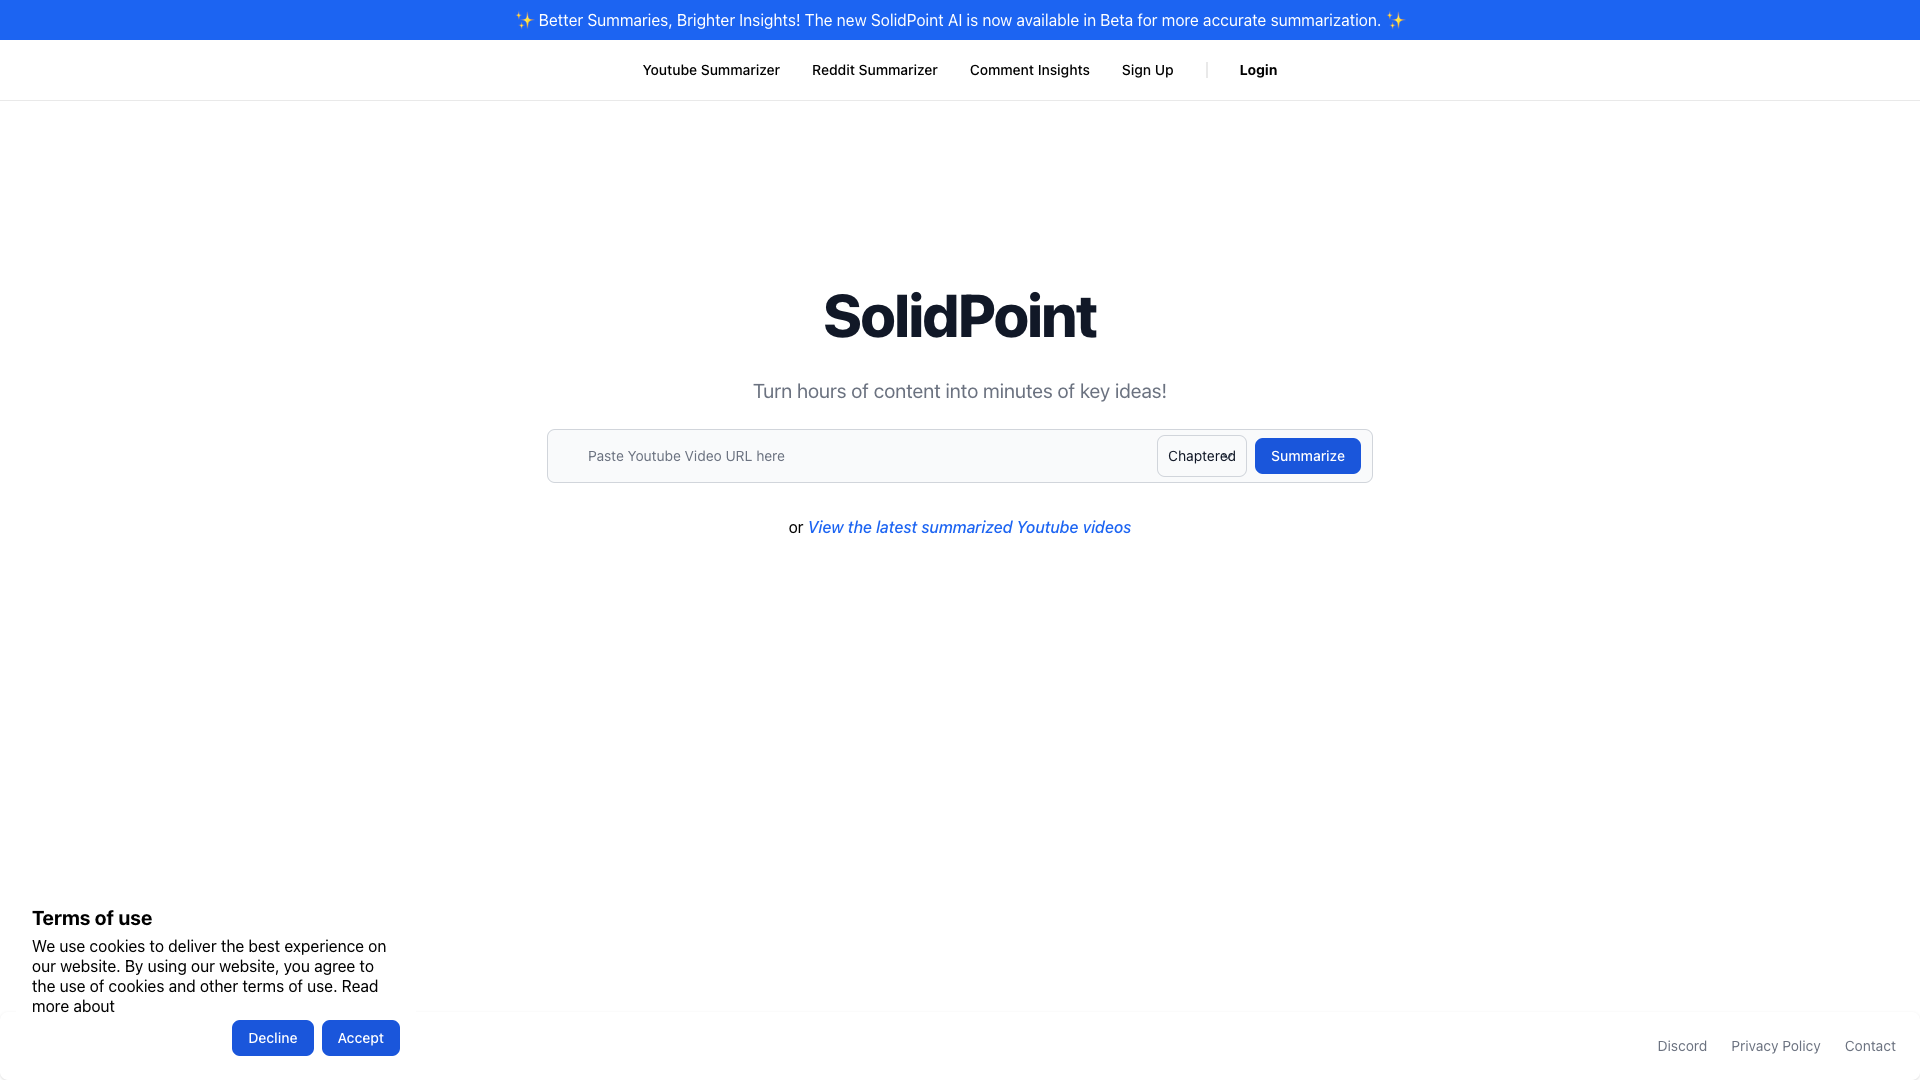 Display image for SolidPoint